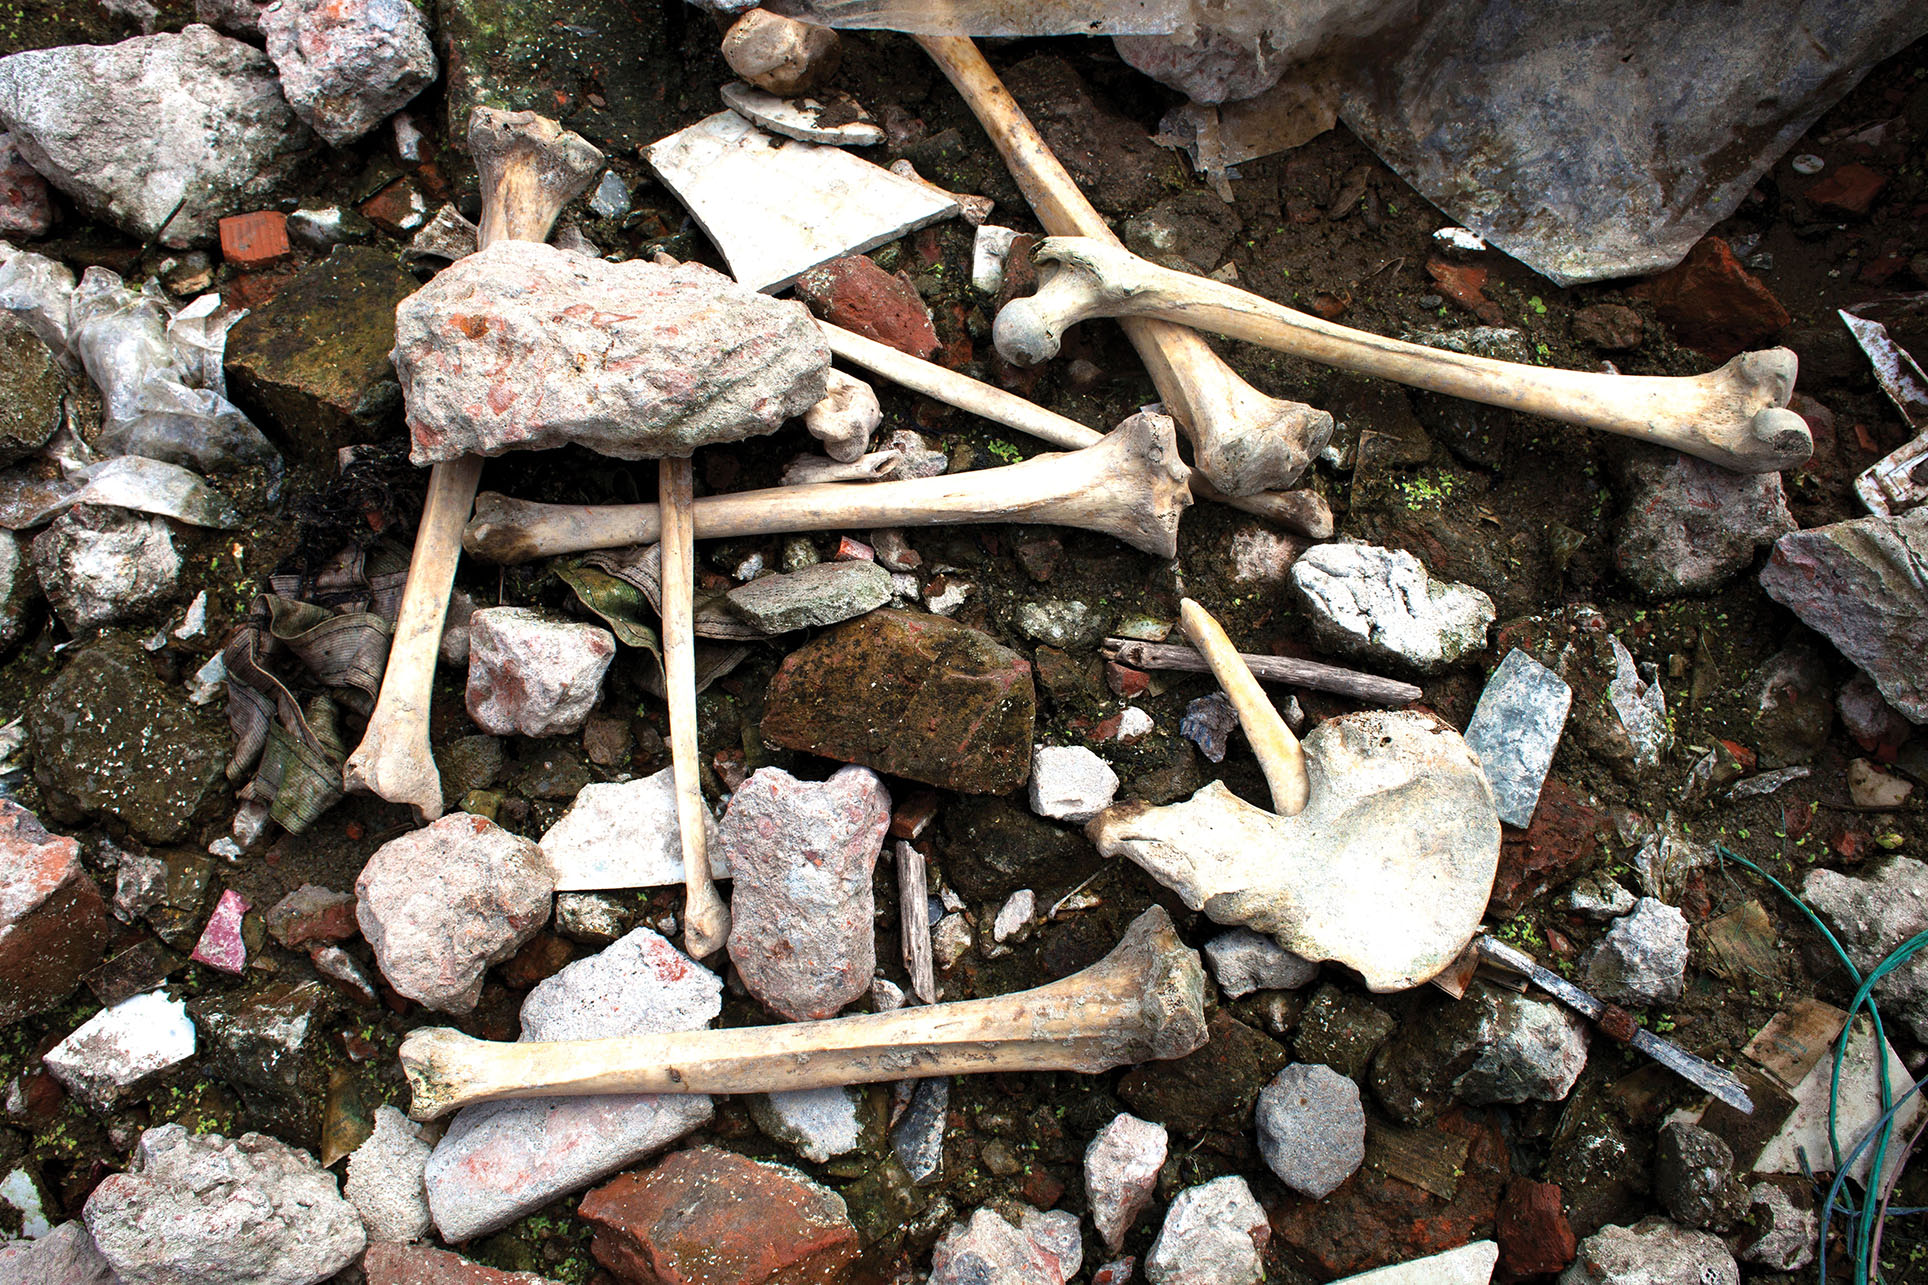 Human bones remain amidst the rubble two years after the Rana Plaza building collapse in Dhaka, Bangladesh. (Photo from Anadolu Agency/Getty Images.)